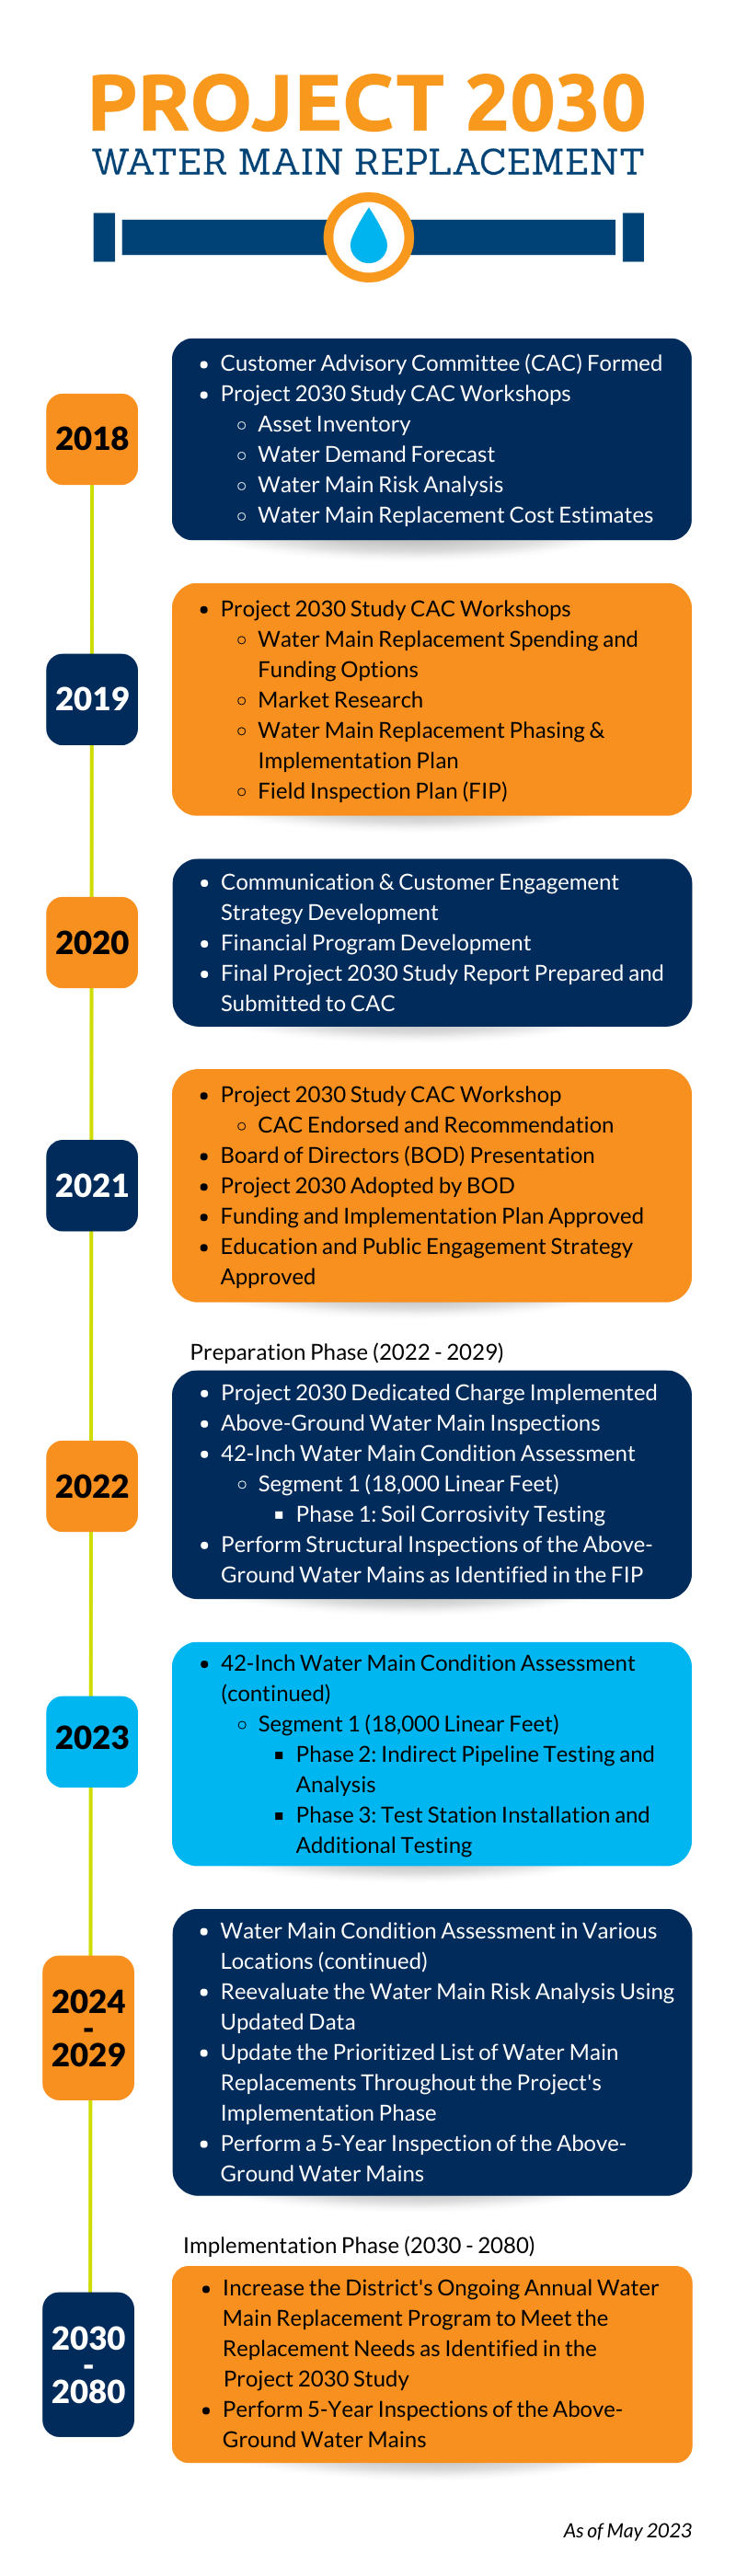 A graphic showing the timeline of Project 2030 from project initiation in 2018 to estimated project completion by 2080.